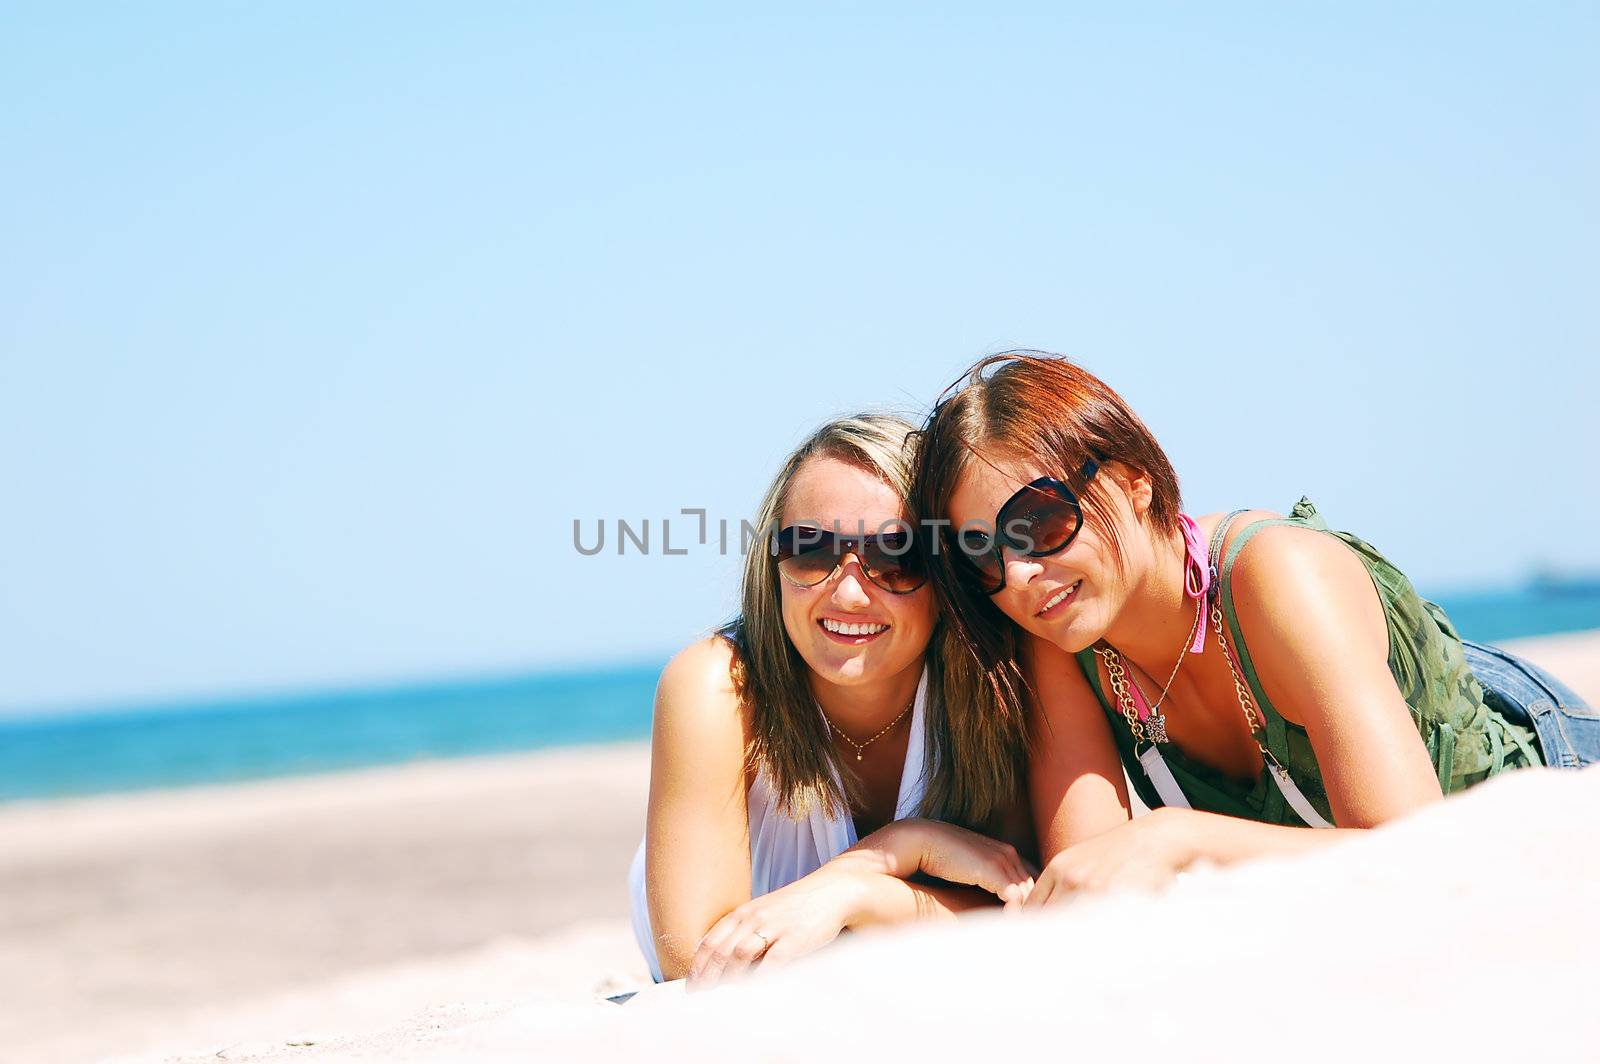 Young attractive girls enjoying together the summer beach